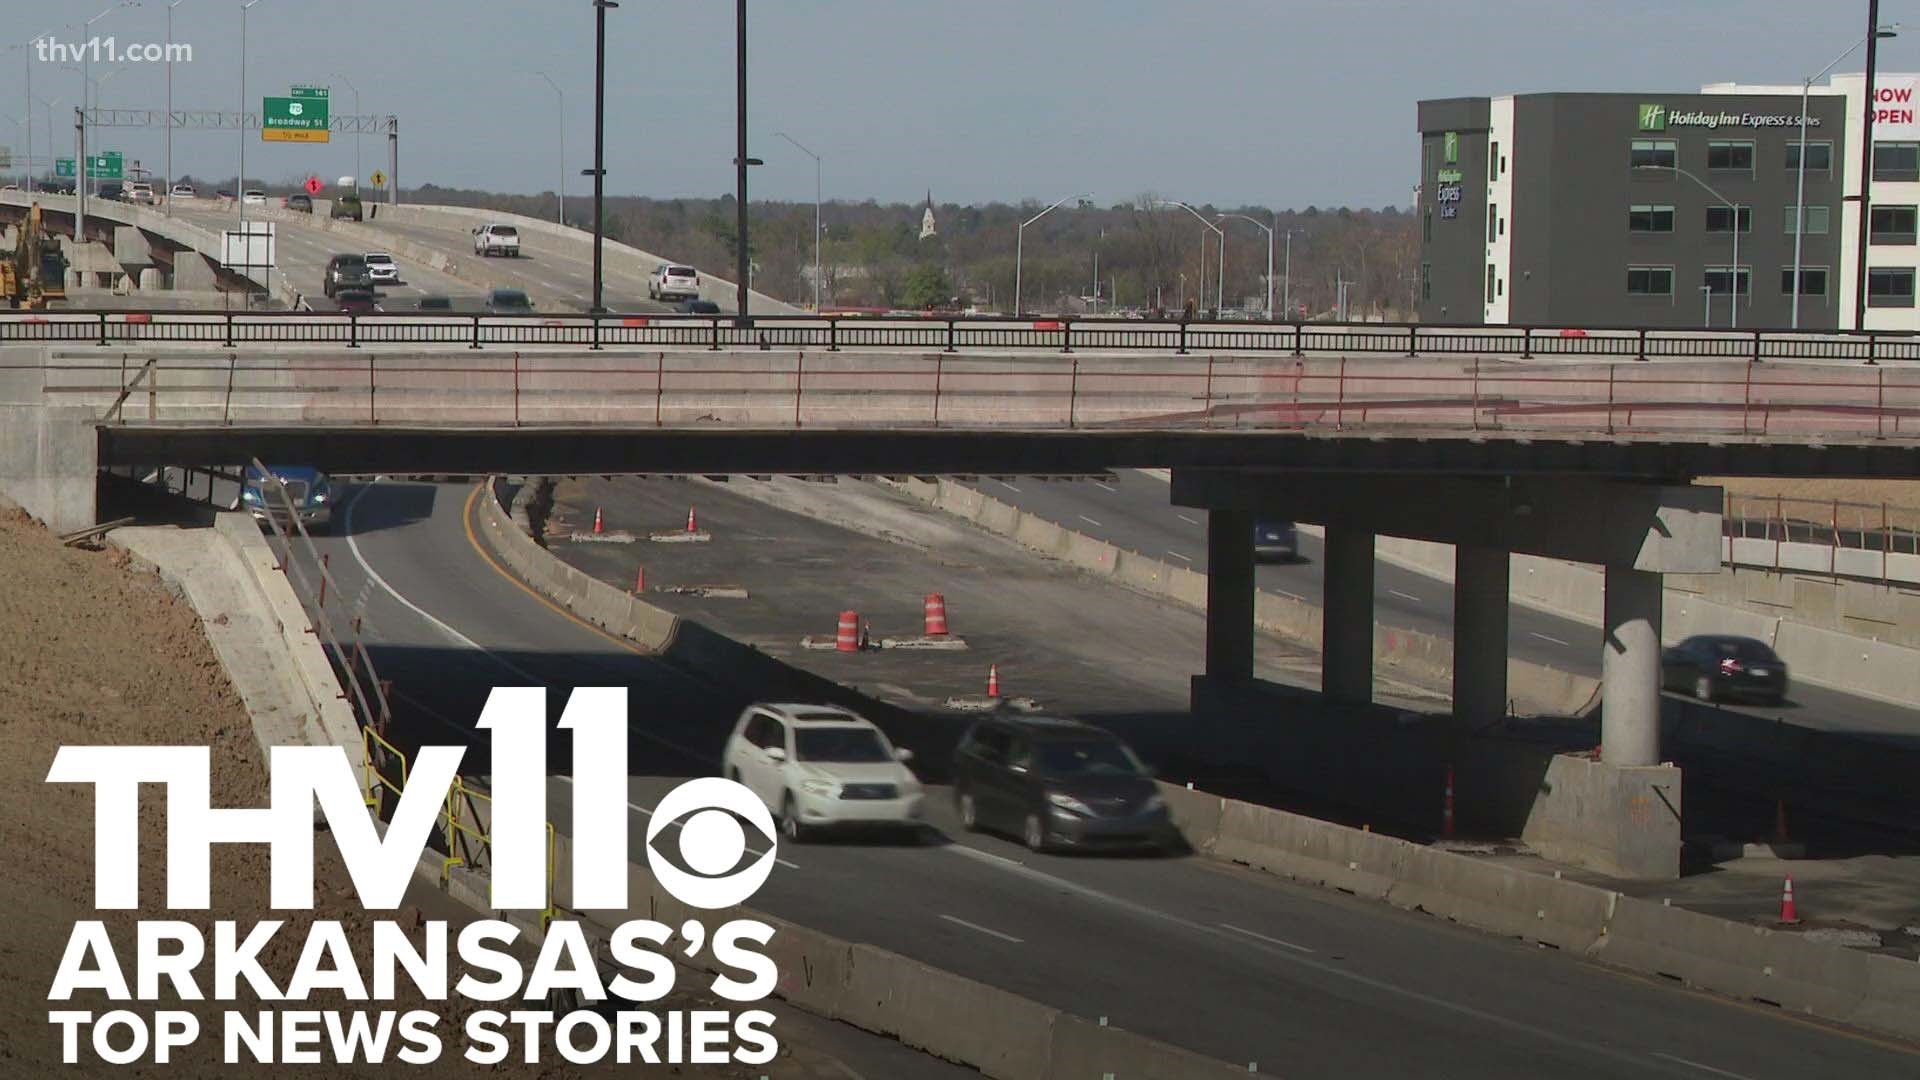 Jurnee Taylor presents Arkansas's top news stories for March 6, 2023, including the partial reopening of the Sixth St. bridge in Little Rock.